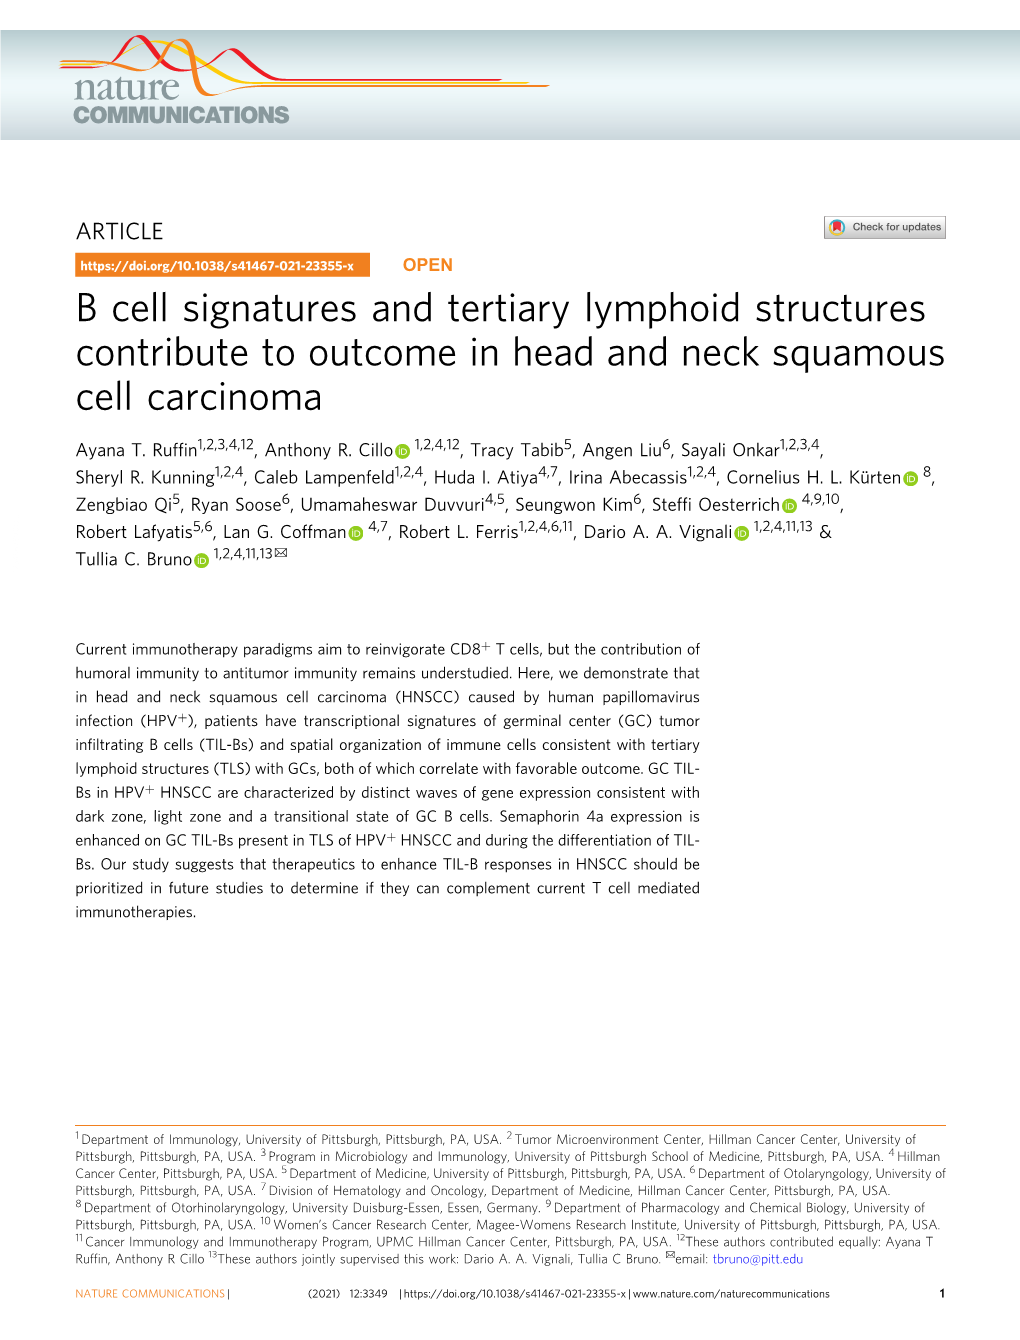 B Cell Signatures and Tertiary Lymphoid Structures Contribute to Outcome in Head and Neck Squamous Cell Carcinoma